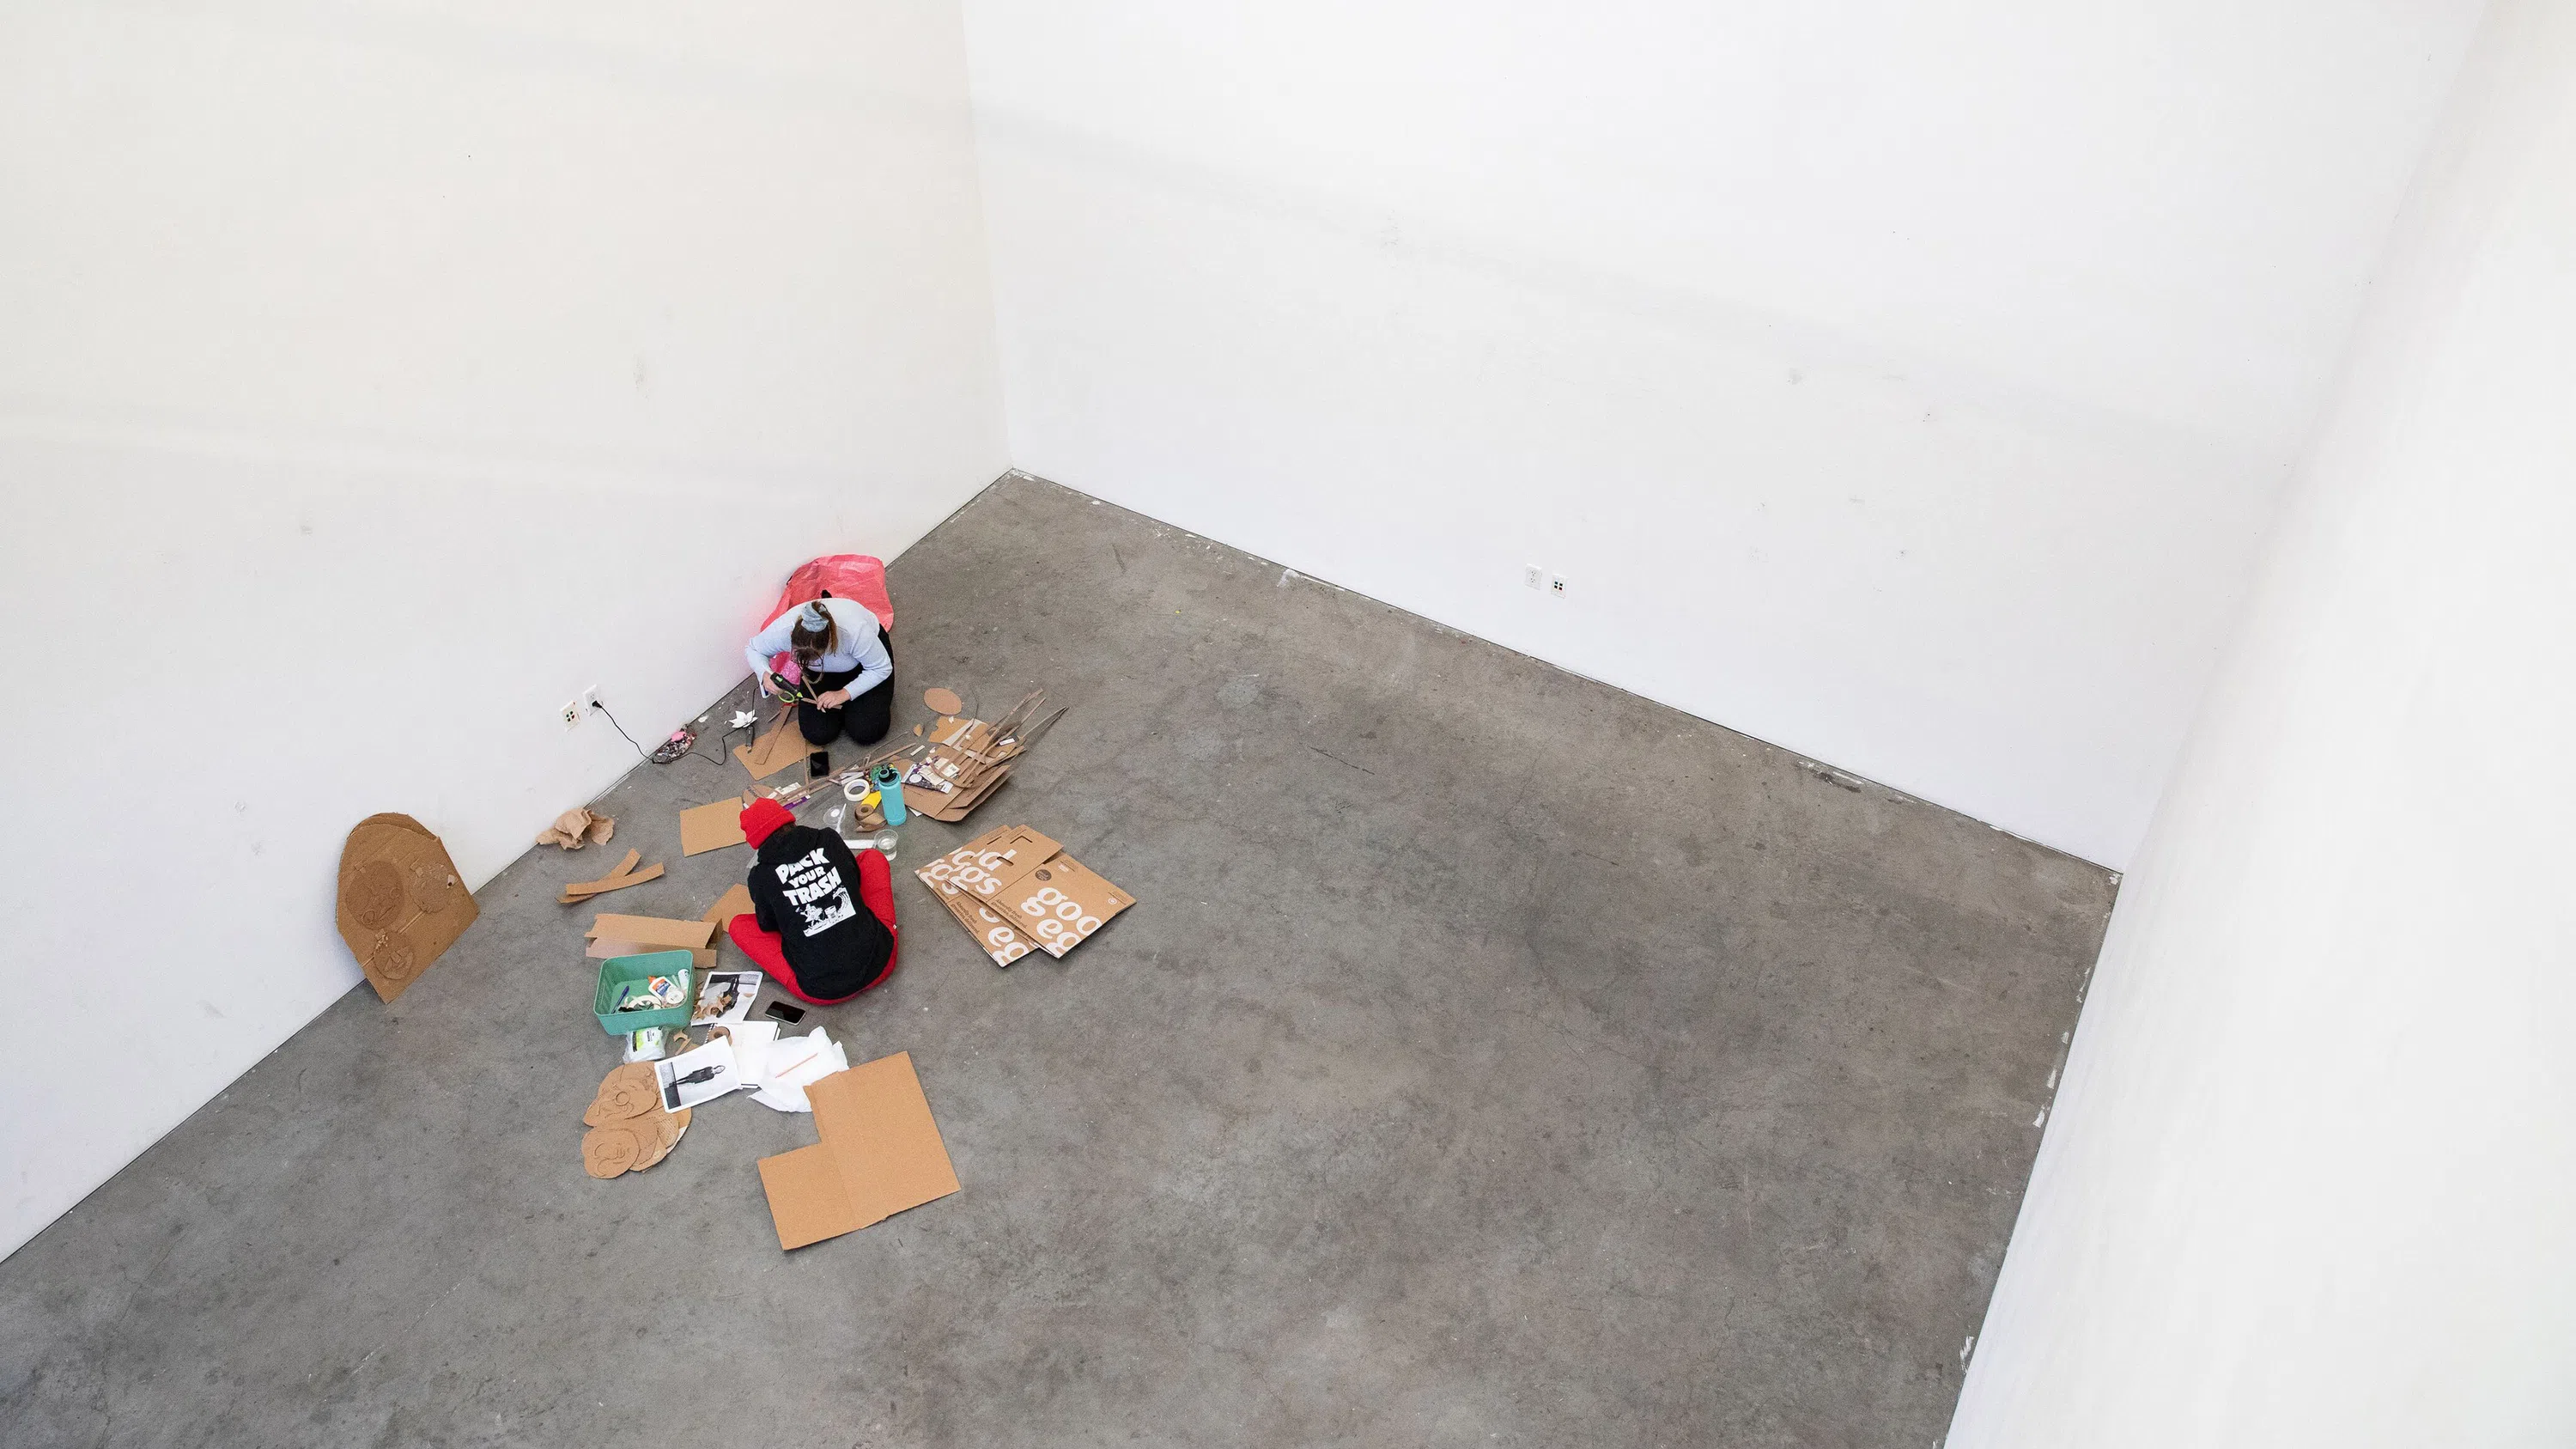 An overhead view of two students working on their Protest Prosthetics project in a white presentation space.